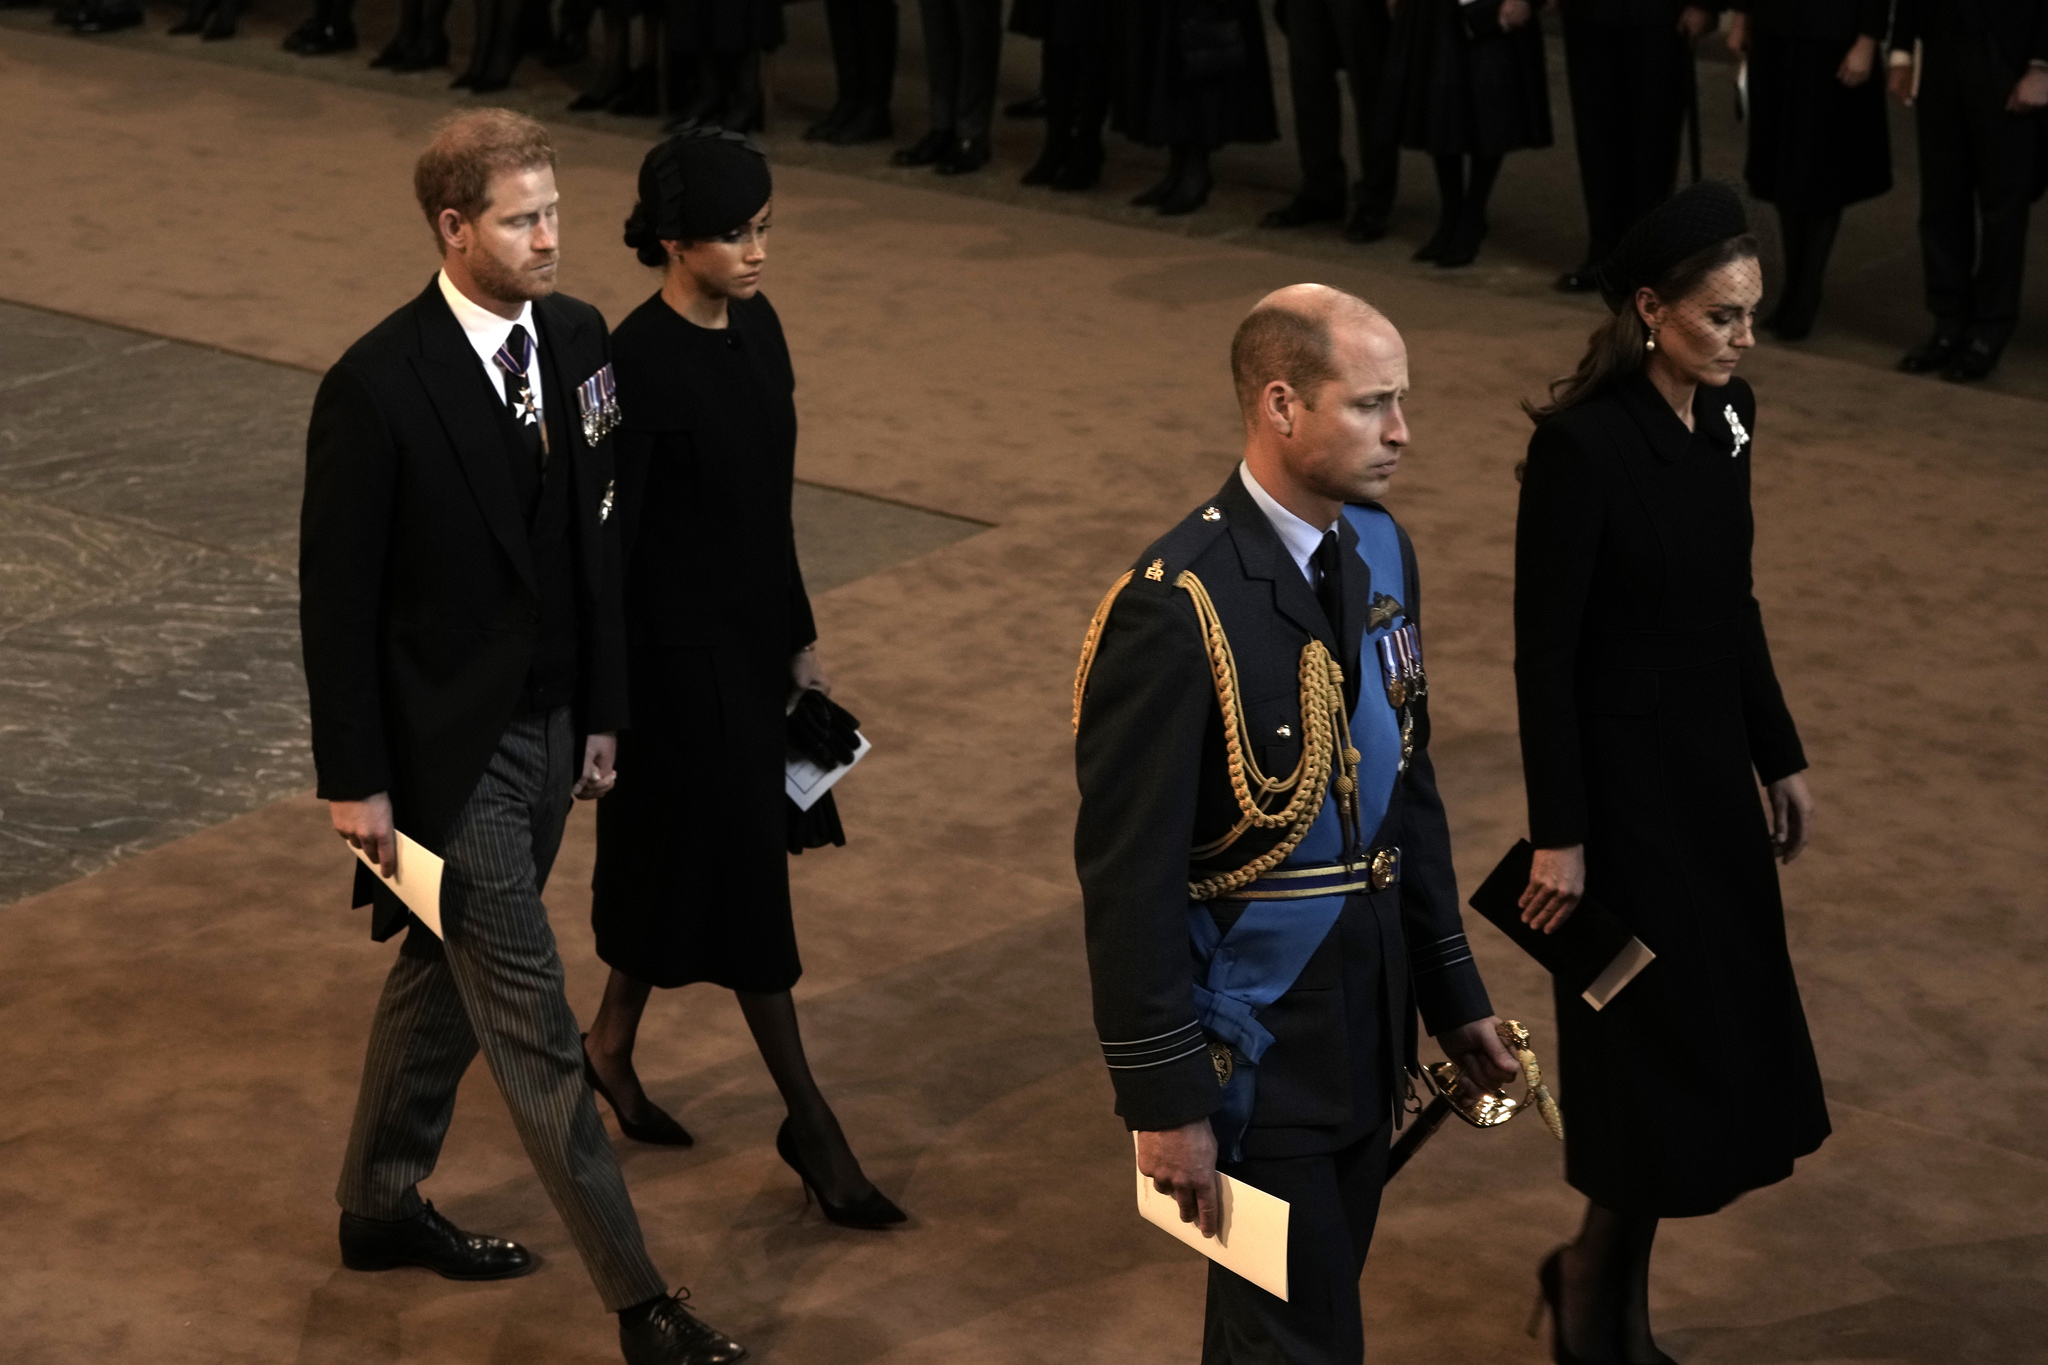 Prince Harry and Meghan, Prince William, and Kate, Princess of Wales leave Westminster Hall in London